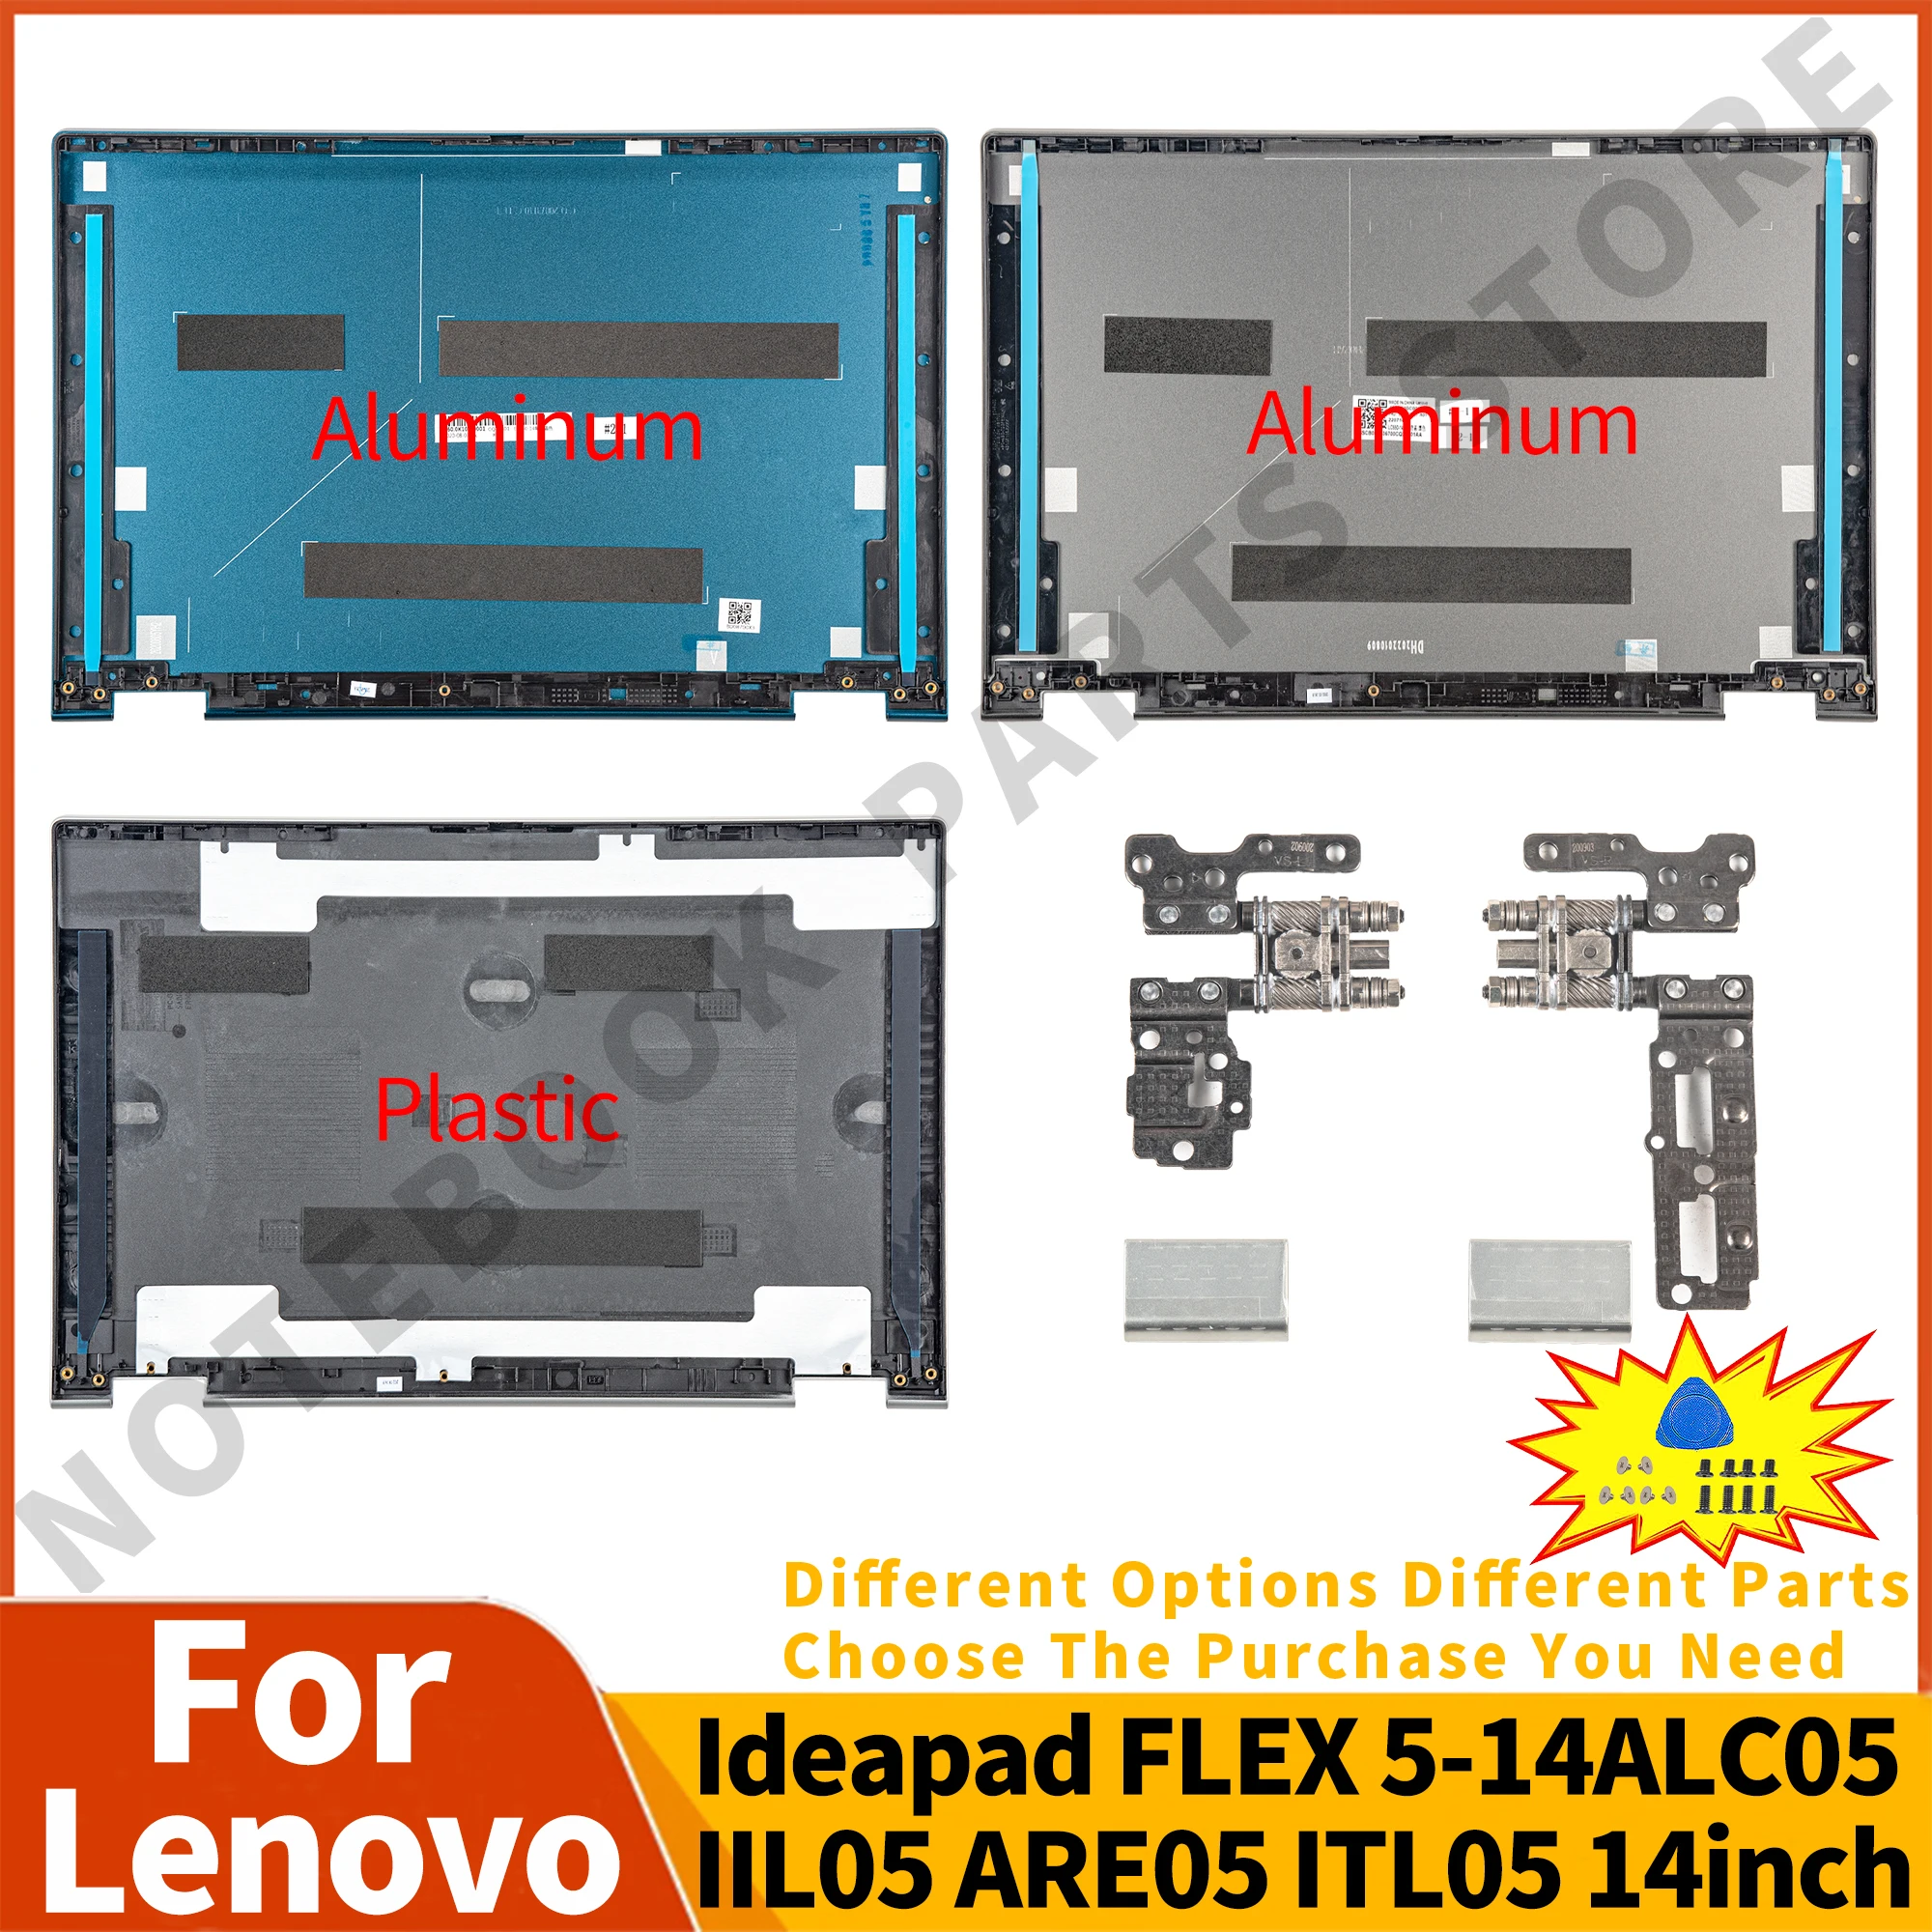 Notebook Parts For Lenovo Ideapad Flex 5-14IIL05 ARE05 ITL05 5-14ALC05 14inch LCD Back Cover Hinges Replacement Metal/Plastic